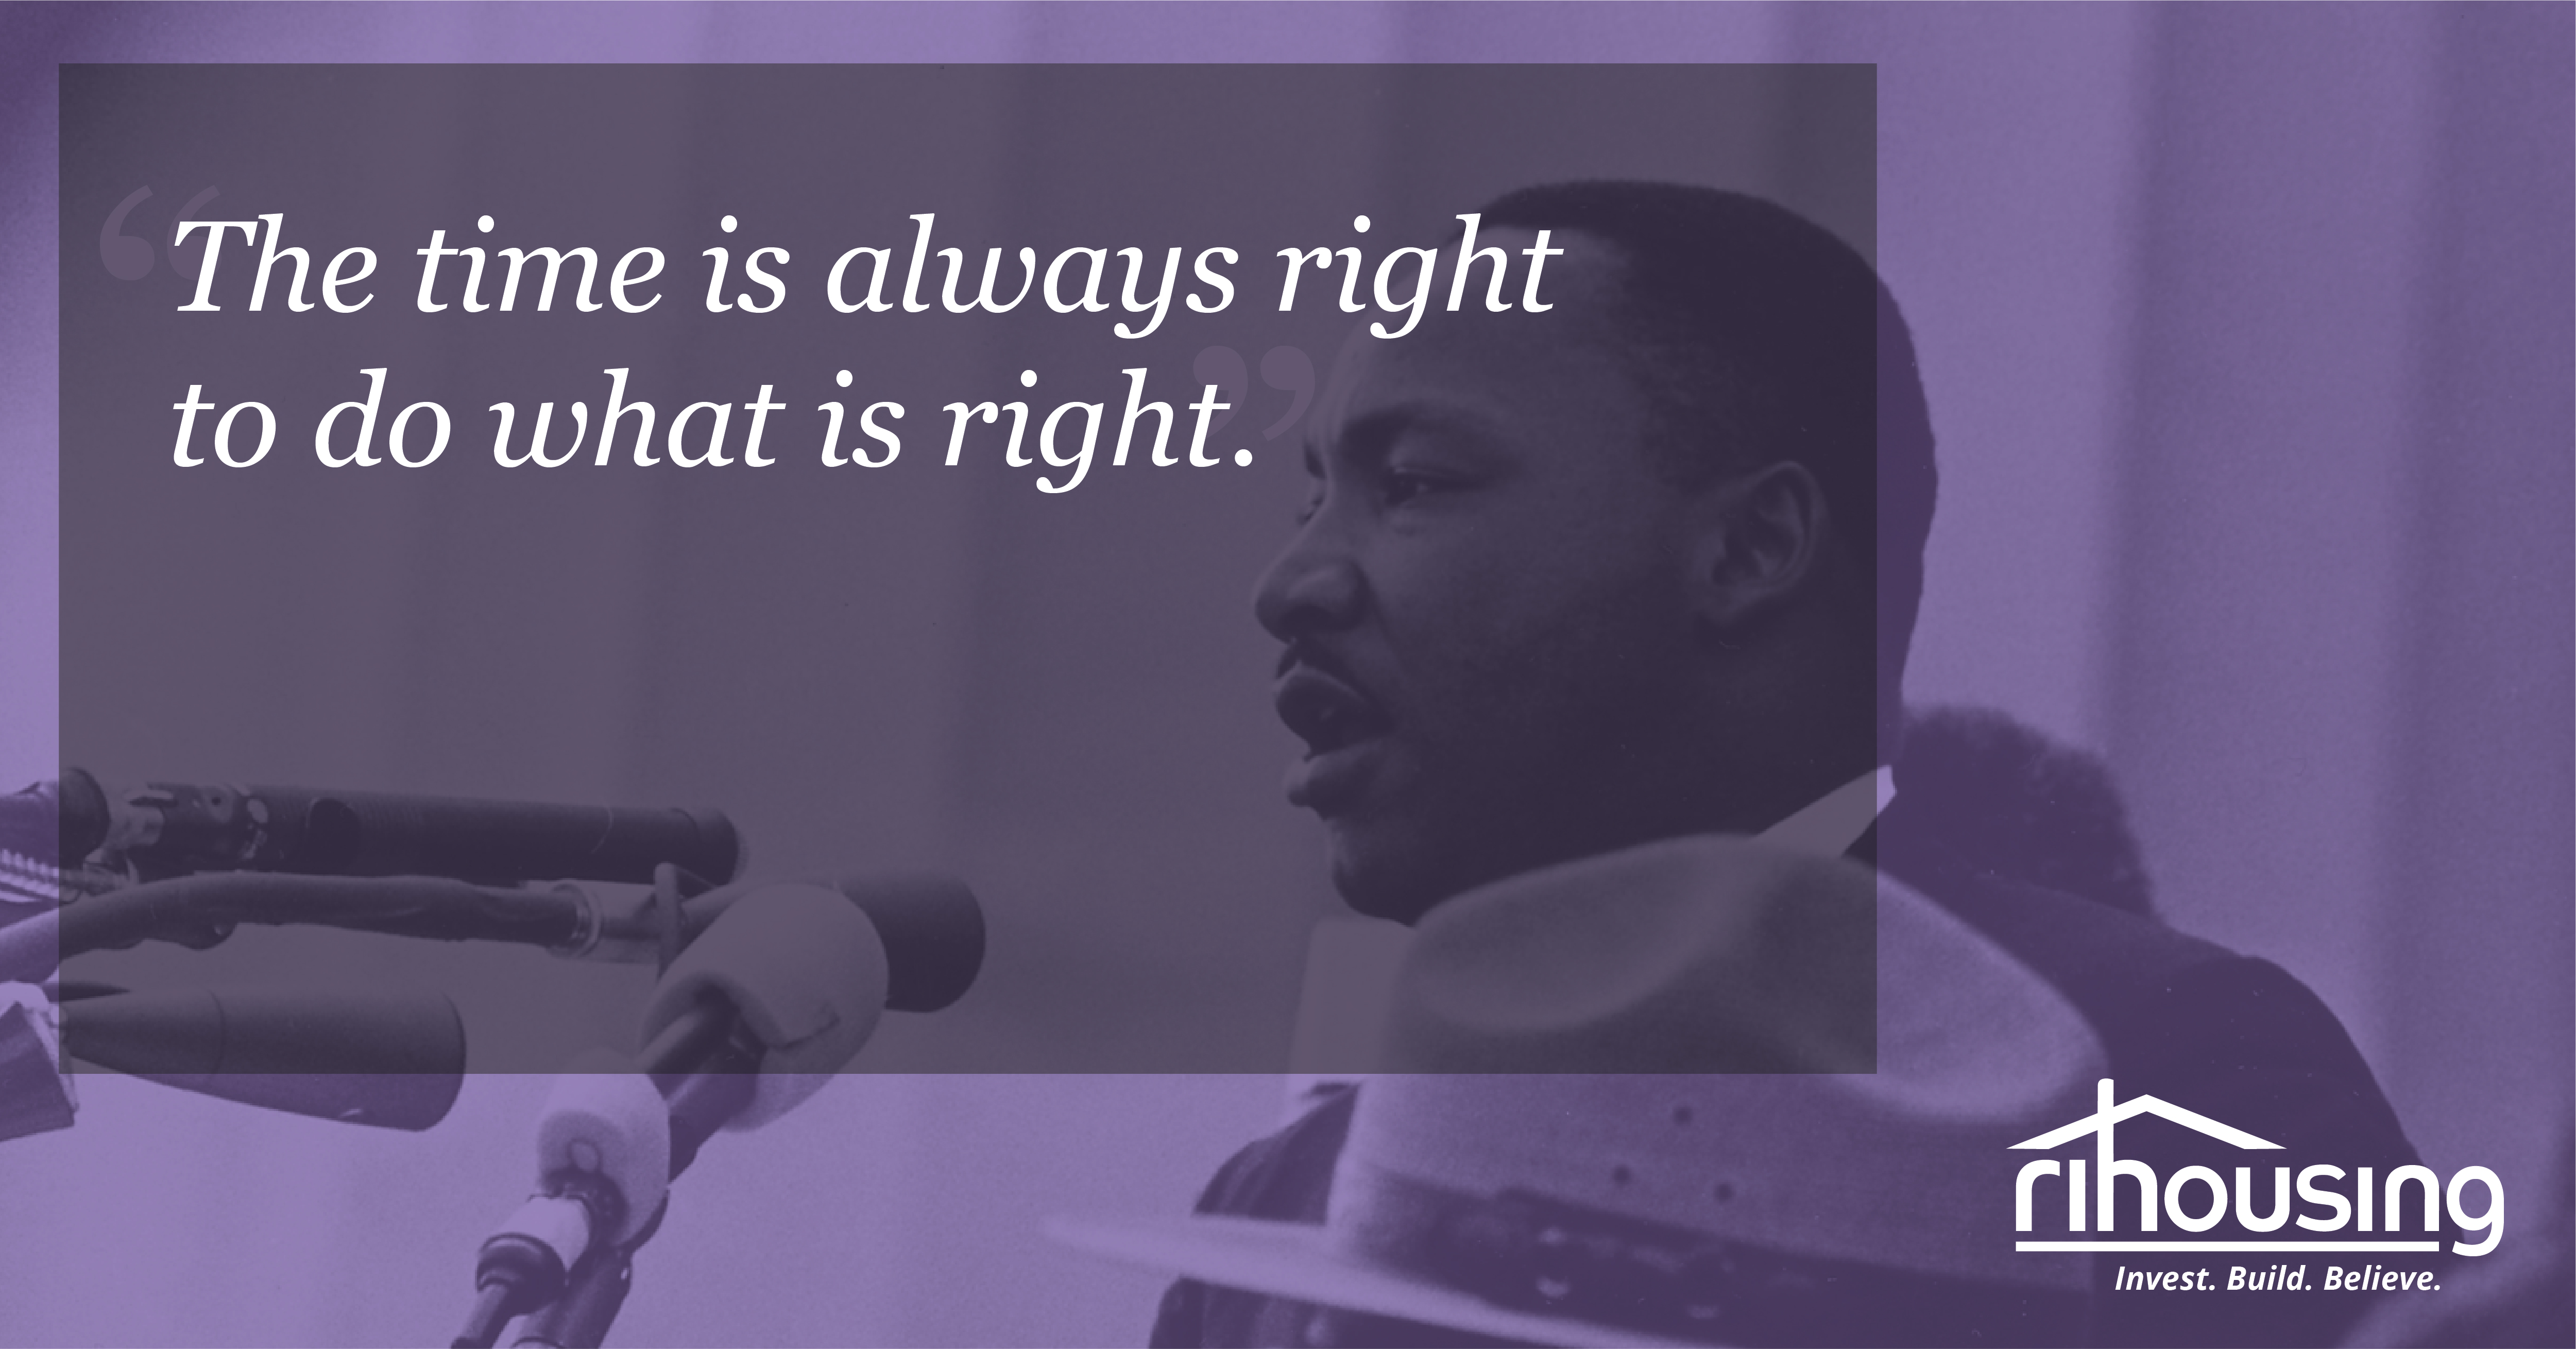 "The time is always right to do what is right" - Dr. Martin Luther King Jr.